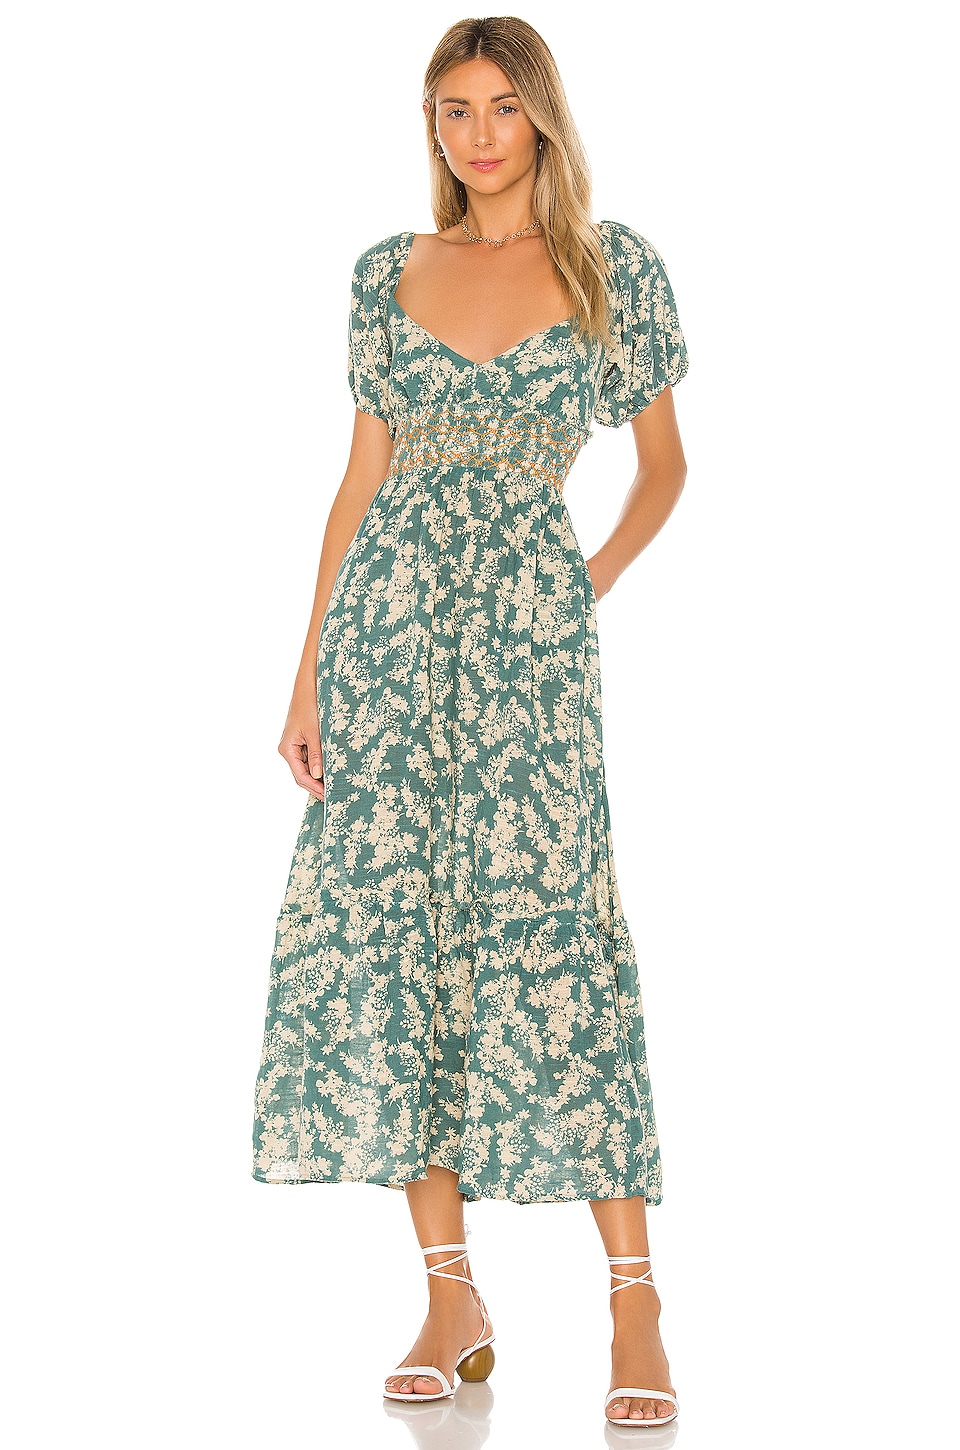 Free People Ellie Printed Maxi Dress in Green | REVOLVE